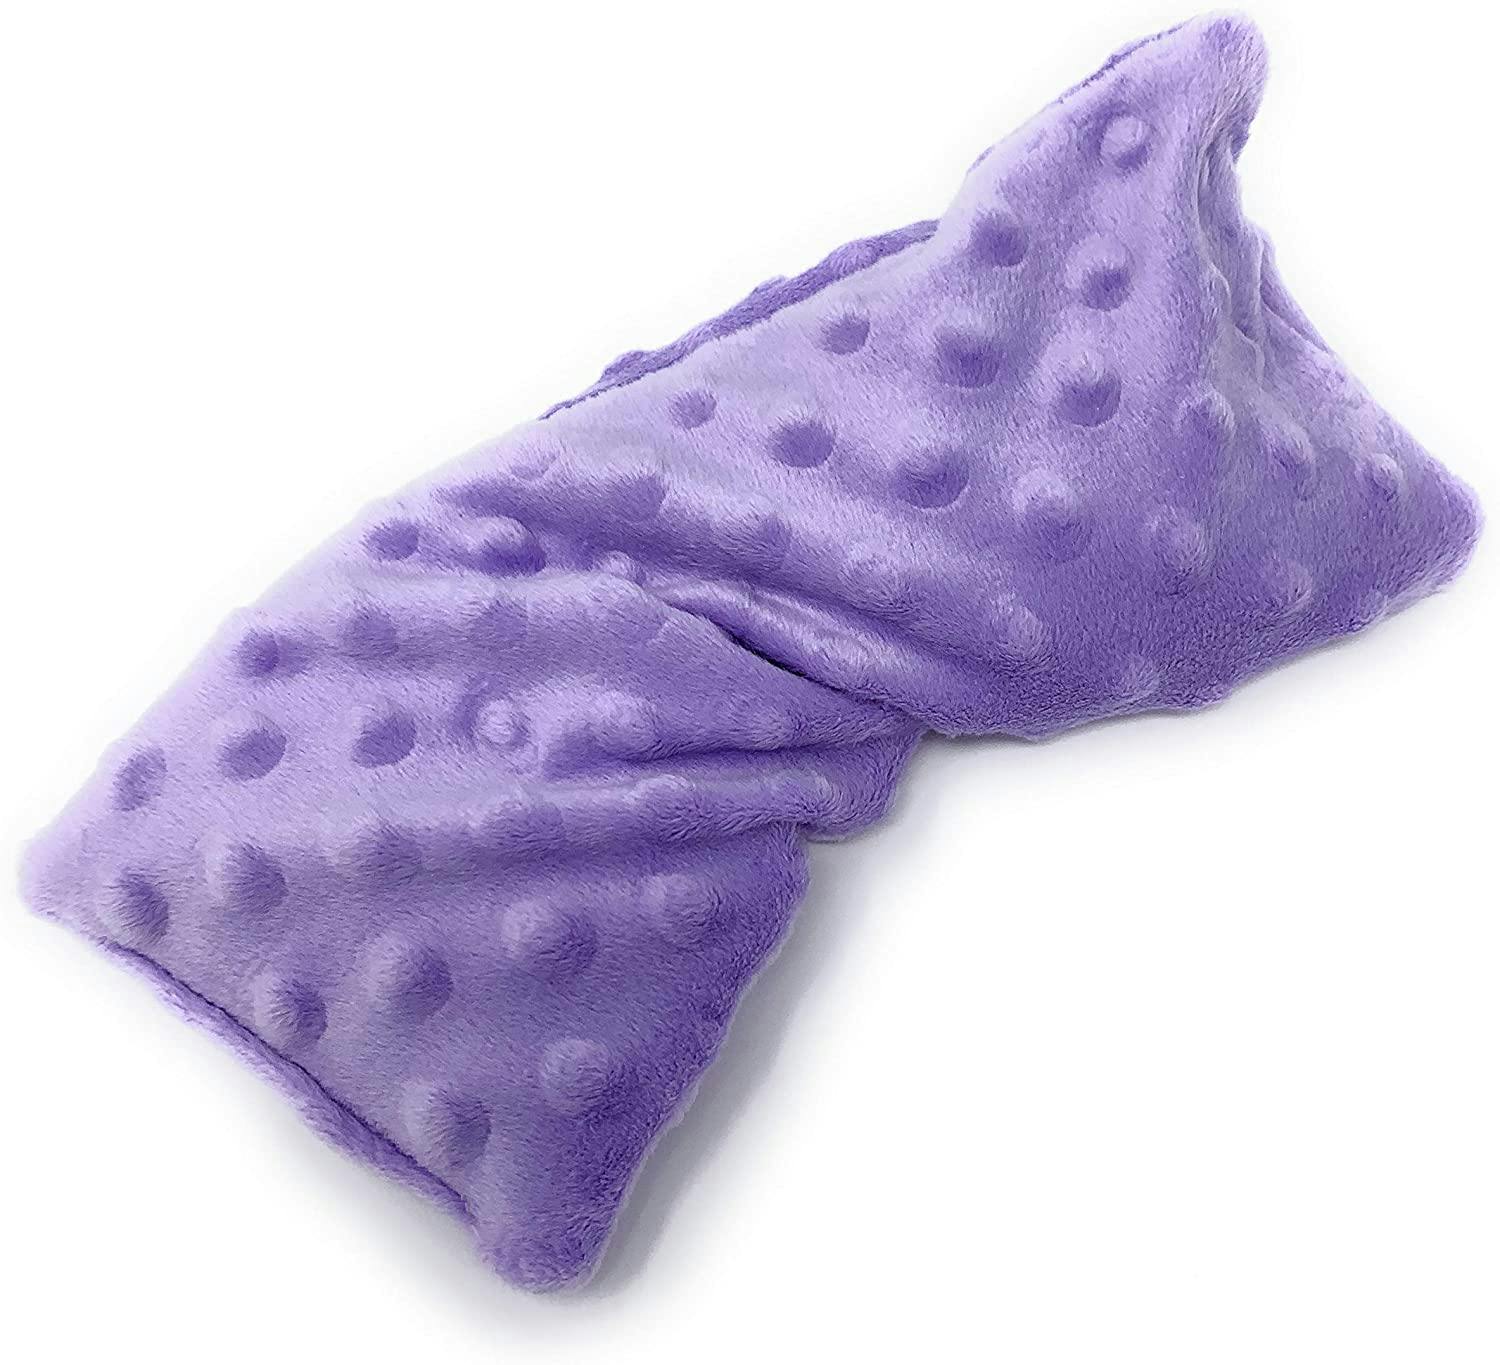 Lavender eye pillow 20 products we love